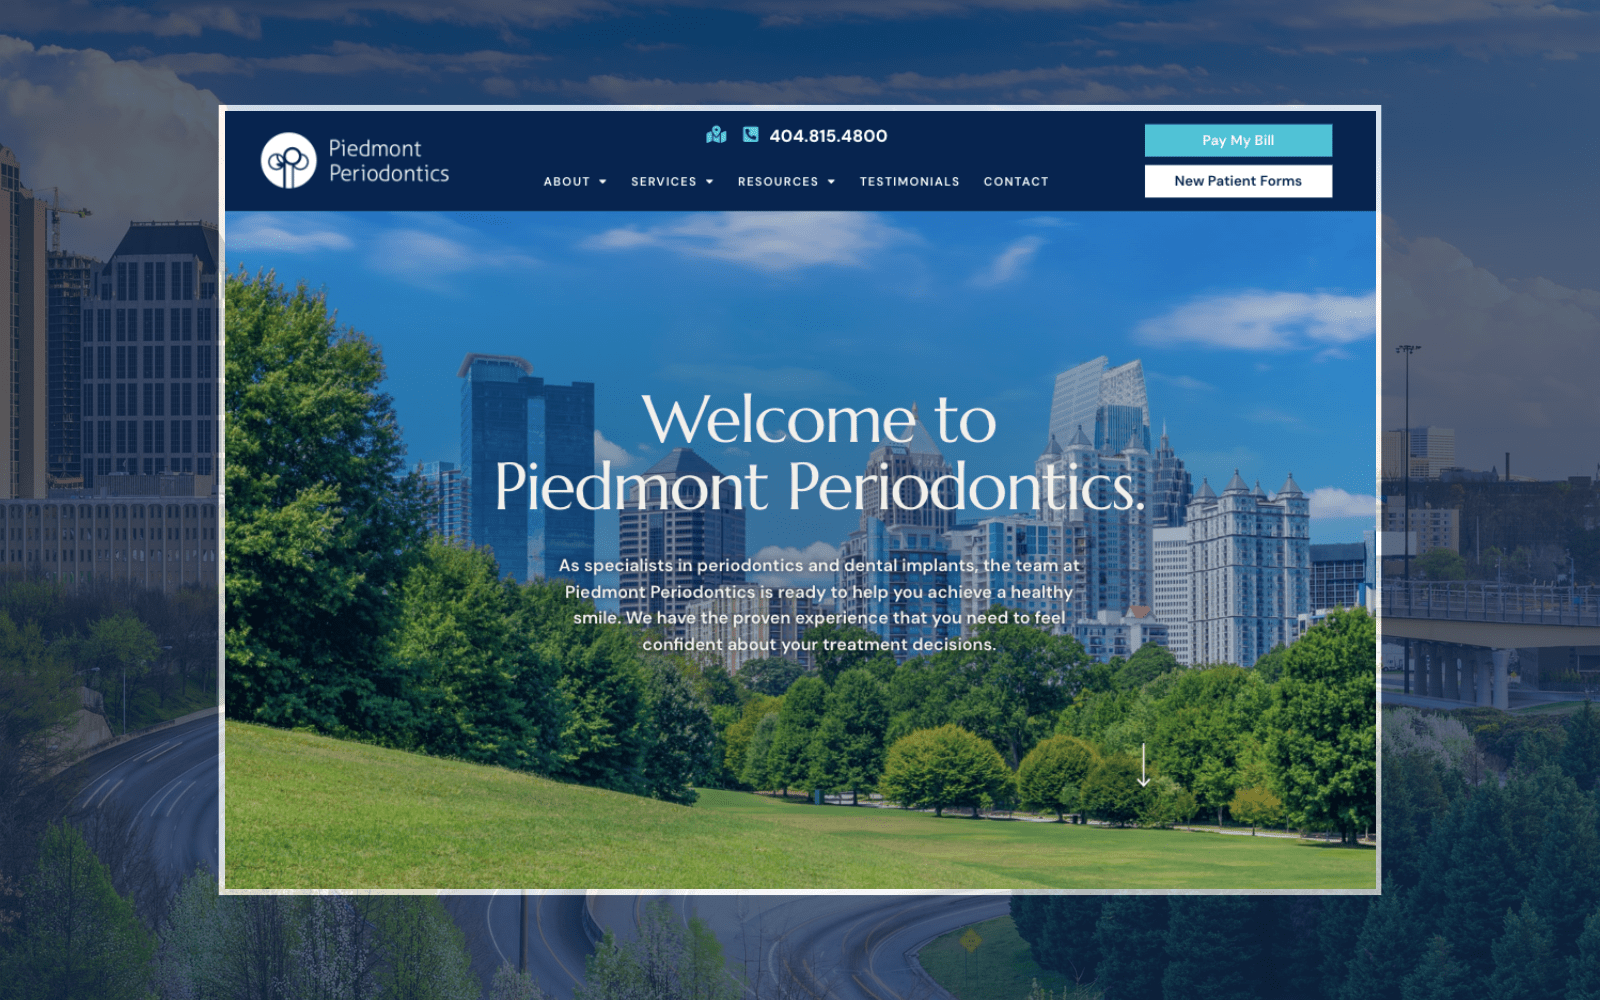 Pediatric dentistry website design featuring colorful graphics and user-friendly layout.